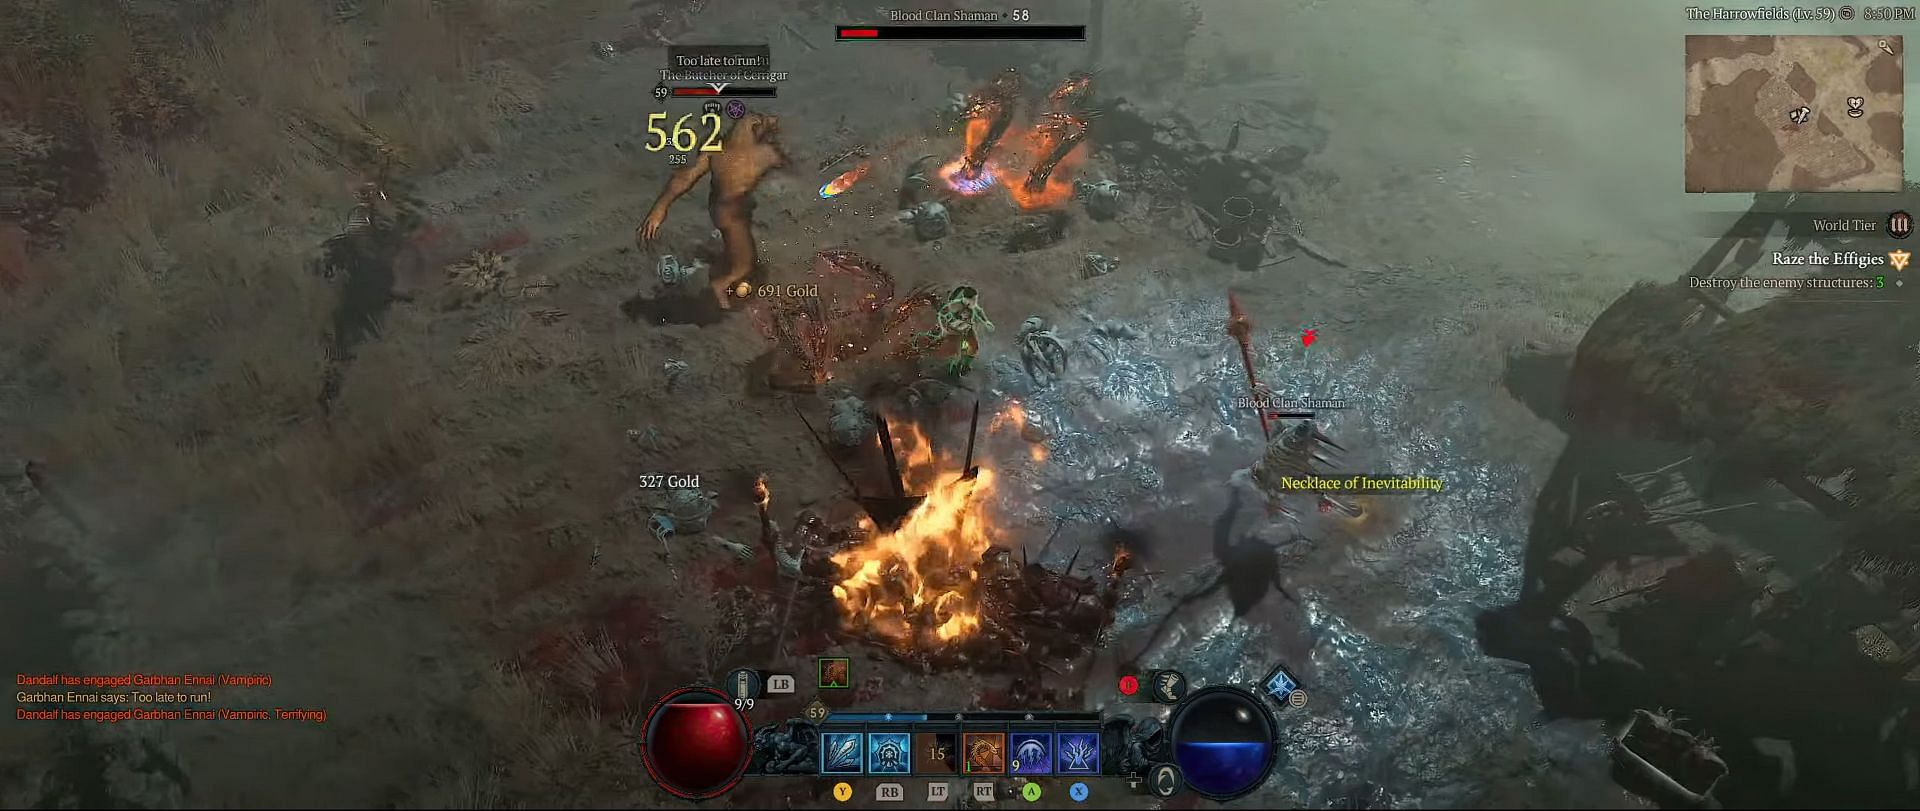 Still from the fight with Garbhan Ennai in Diablo 4 (Image via Blizzard Entertainment)